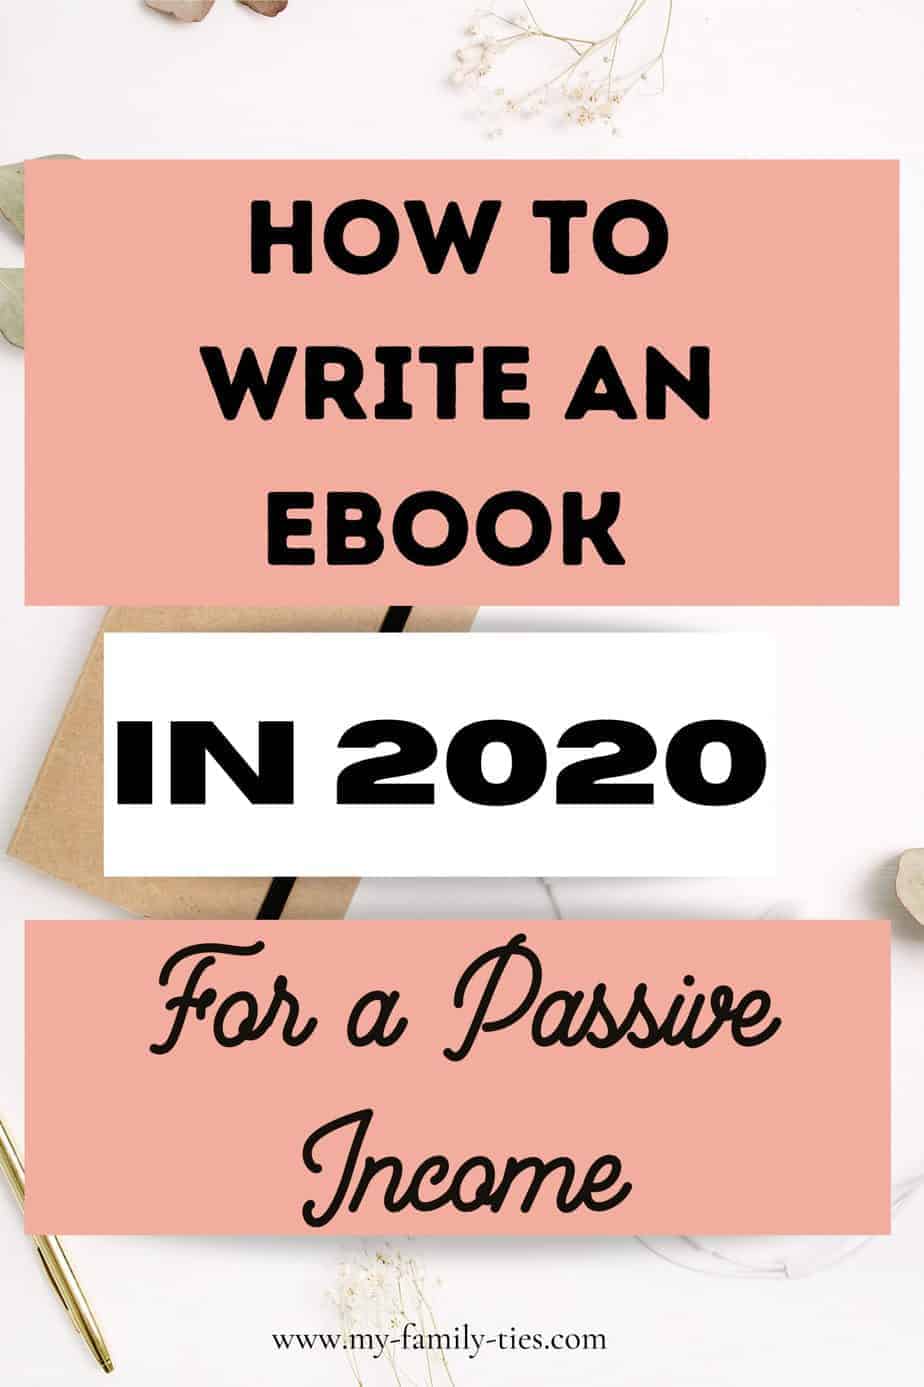 Have you ever wanted to write an ebook to create a passive income? Here are some top tips and ideas to help you create your ebook today! | My Family Ties